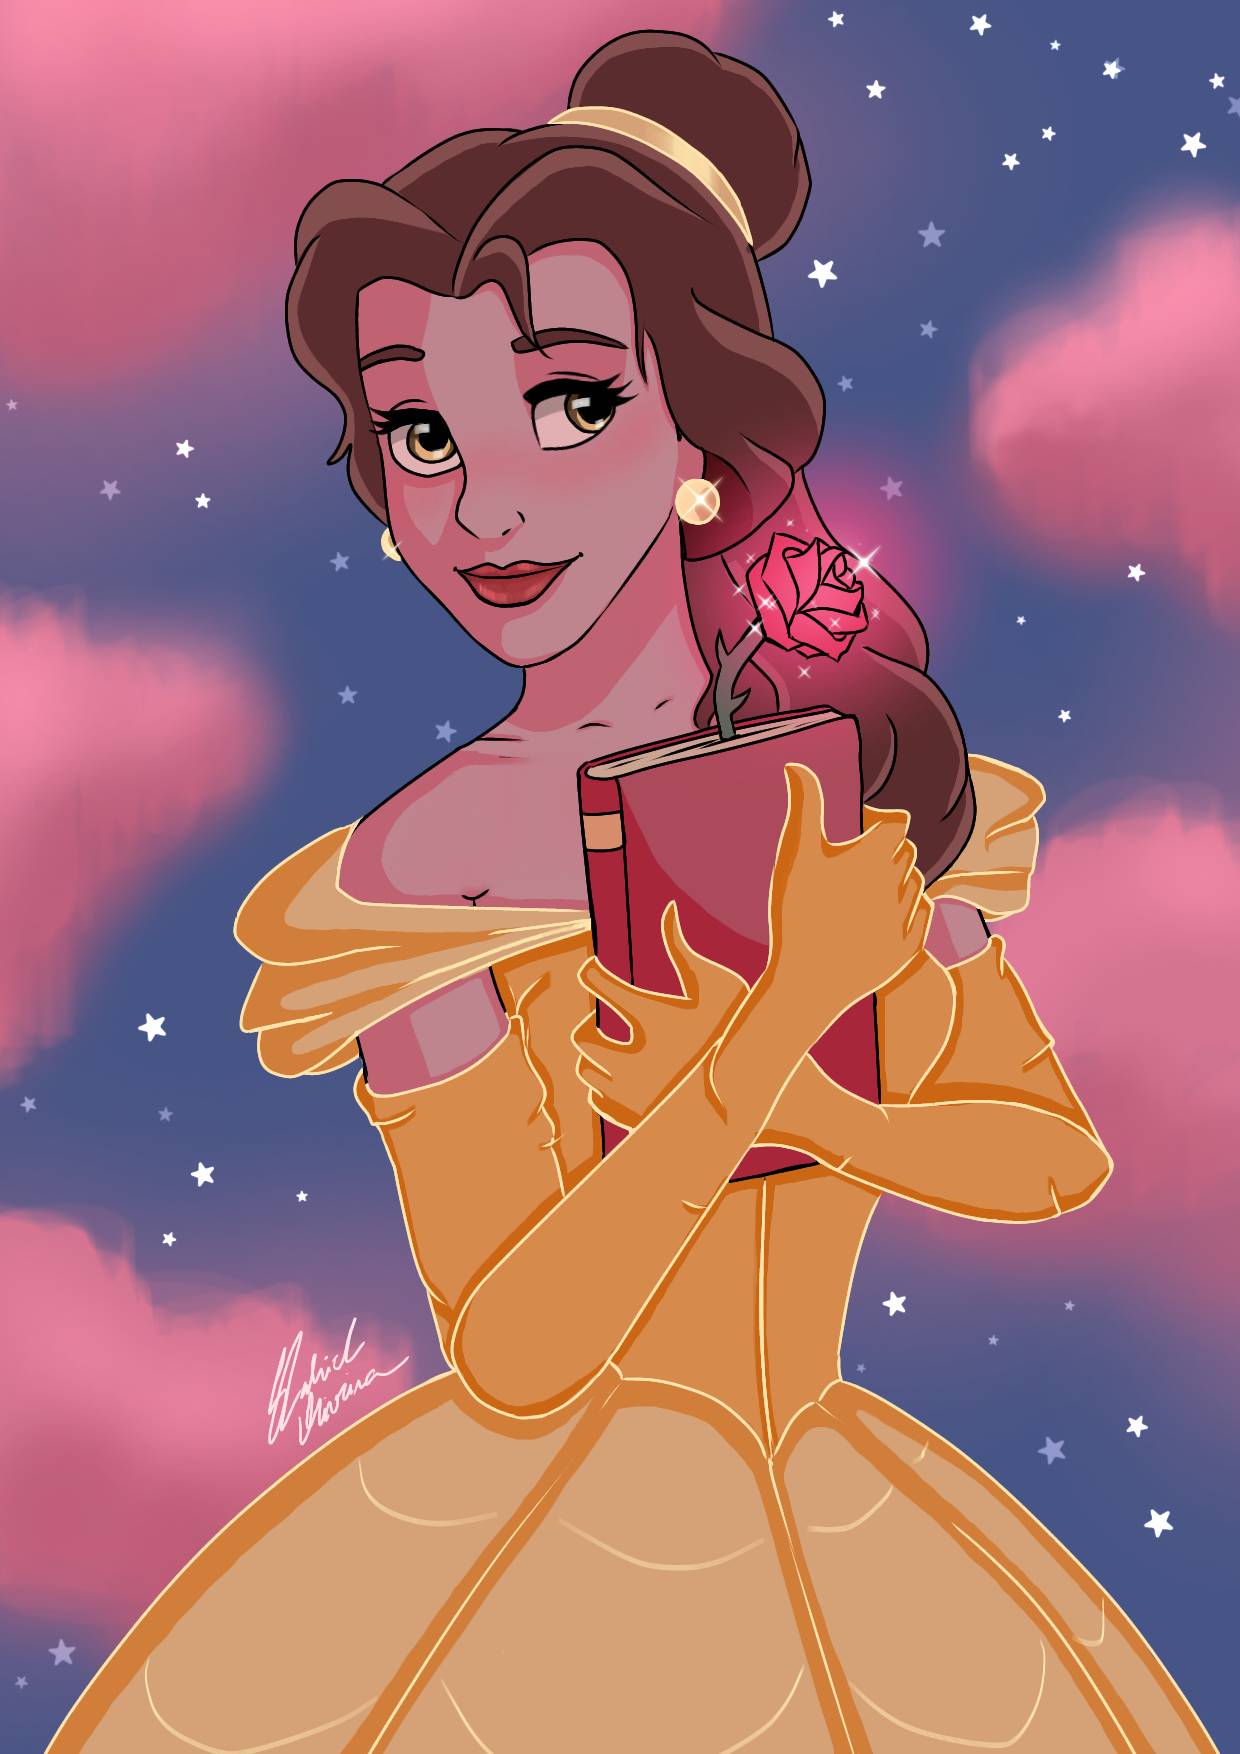 Princess Belle (Disney's Beauty and the Beast) by GabrielGeog on